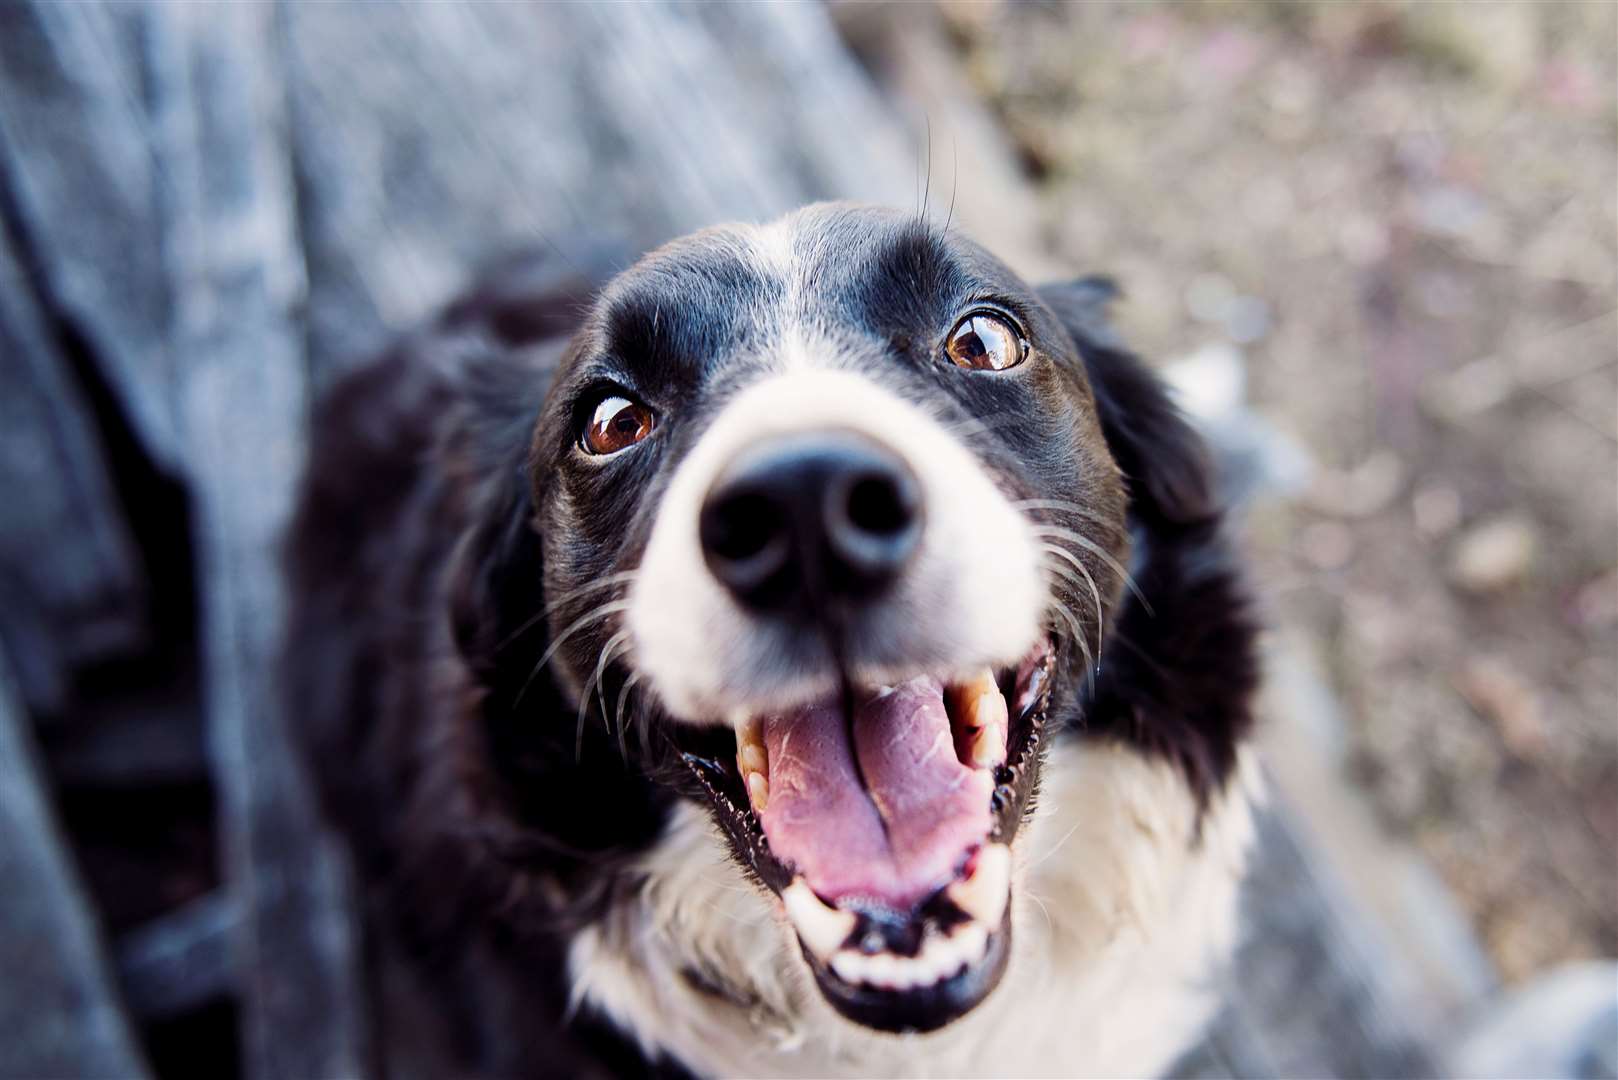 A stock image of a dog